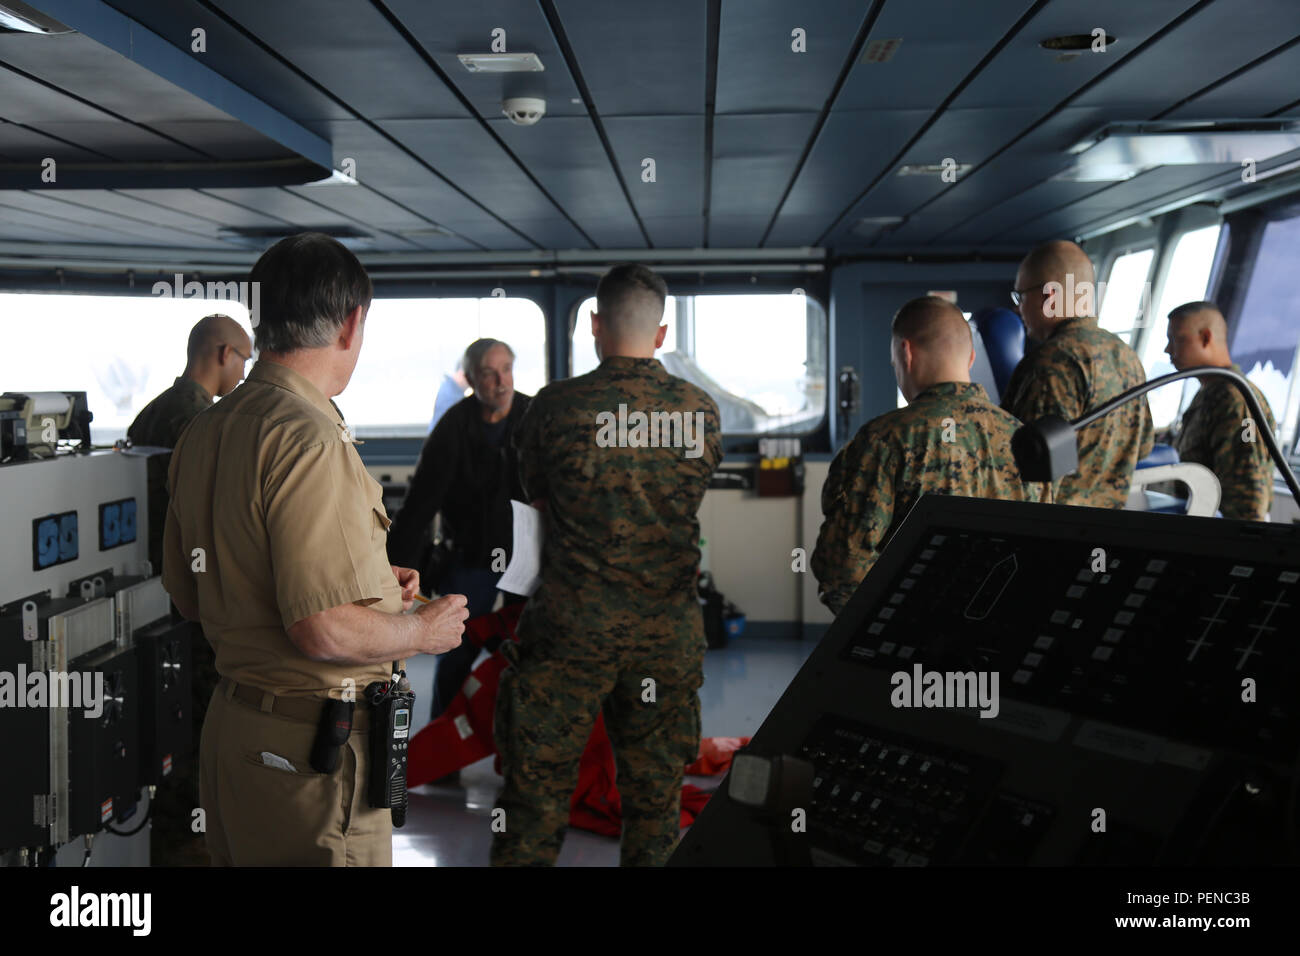 151218-M-AY110-005  Dec 18, 2015, USNS Matthew Perry, Philippine Sea, At Sea – The USNS Matthew Perry (T-AKE-9) delivers supplies and goods to various ports and vessels within their area of operation. Marines from 3rd Marine Division surveyed the USNS Matthew Perry in order to plan for future operations aboard the ship, maximizing the ship’s potential for Marines to operate at sea as they did in the past. Marines receive a brief from the ship’s fire marshal on how to use a “Gumby Suit” otherwise known as an immersion survival suit. (U.S. Marine Corps photo by SSgt. Jeffrey S. Caraway/Released) Stock Photo